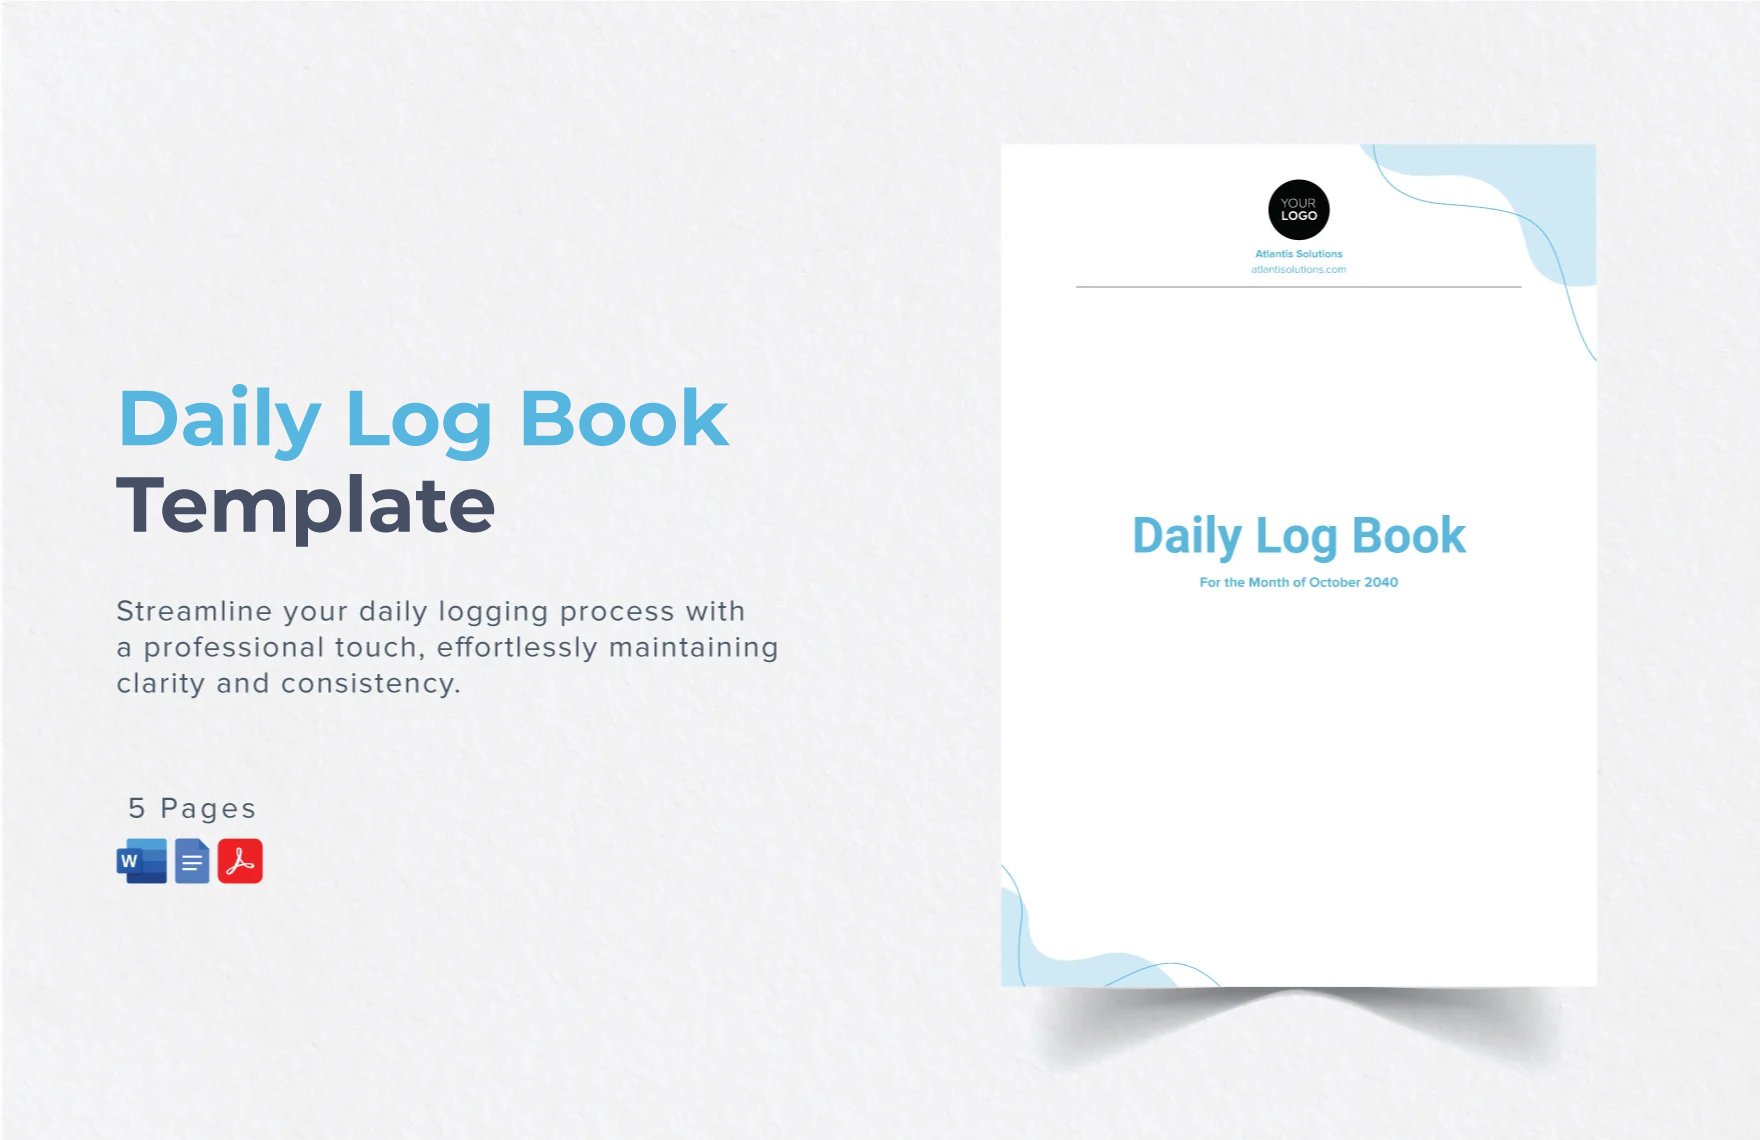 Daily Log Book Template